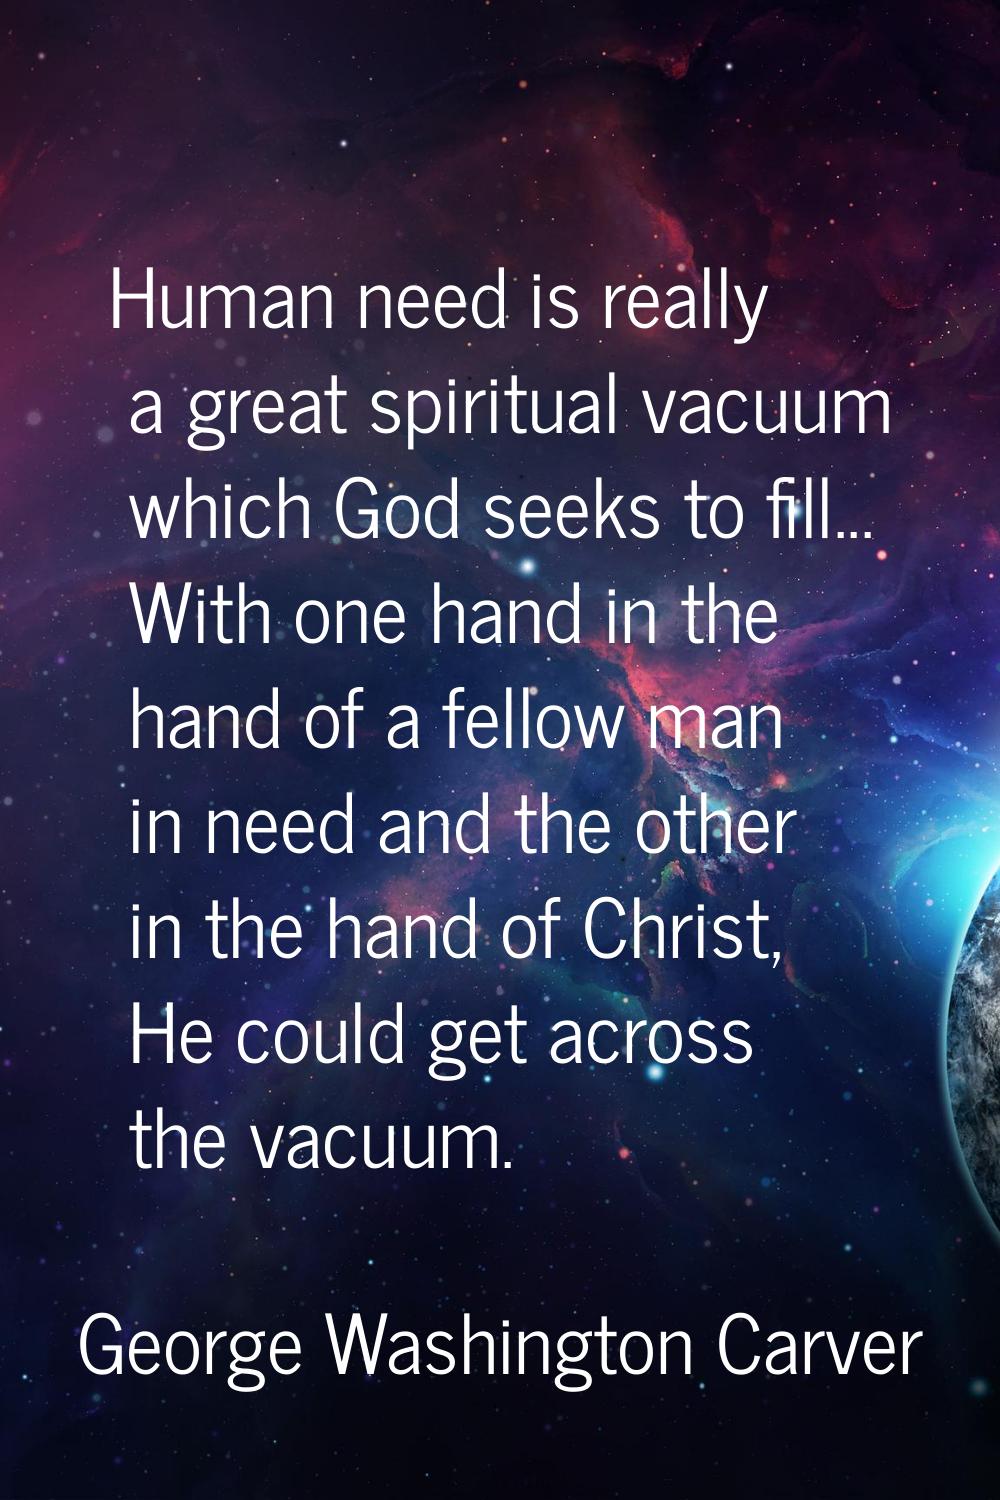 Human need is really a great spiritual vacuum which God seeks to fill... With one hand in the hand 